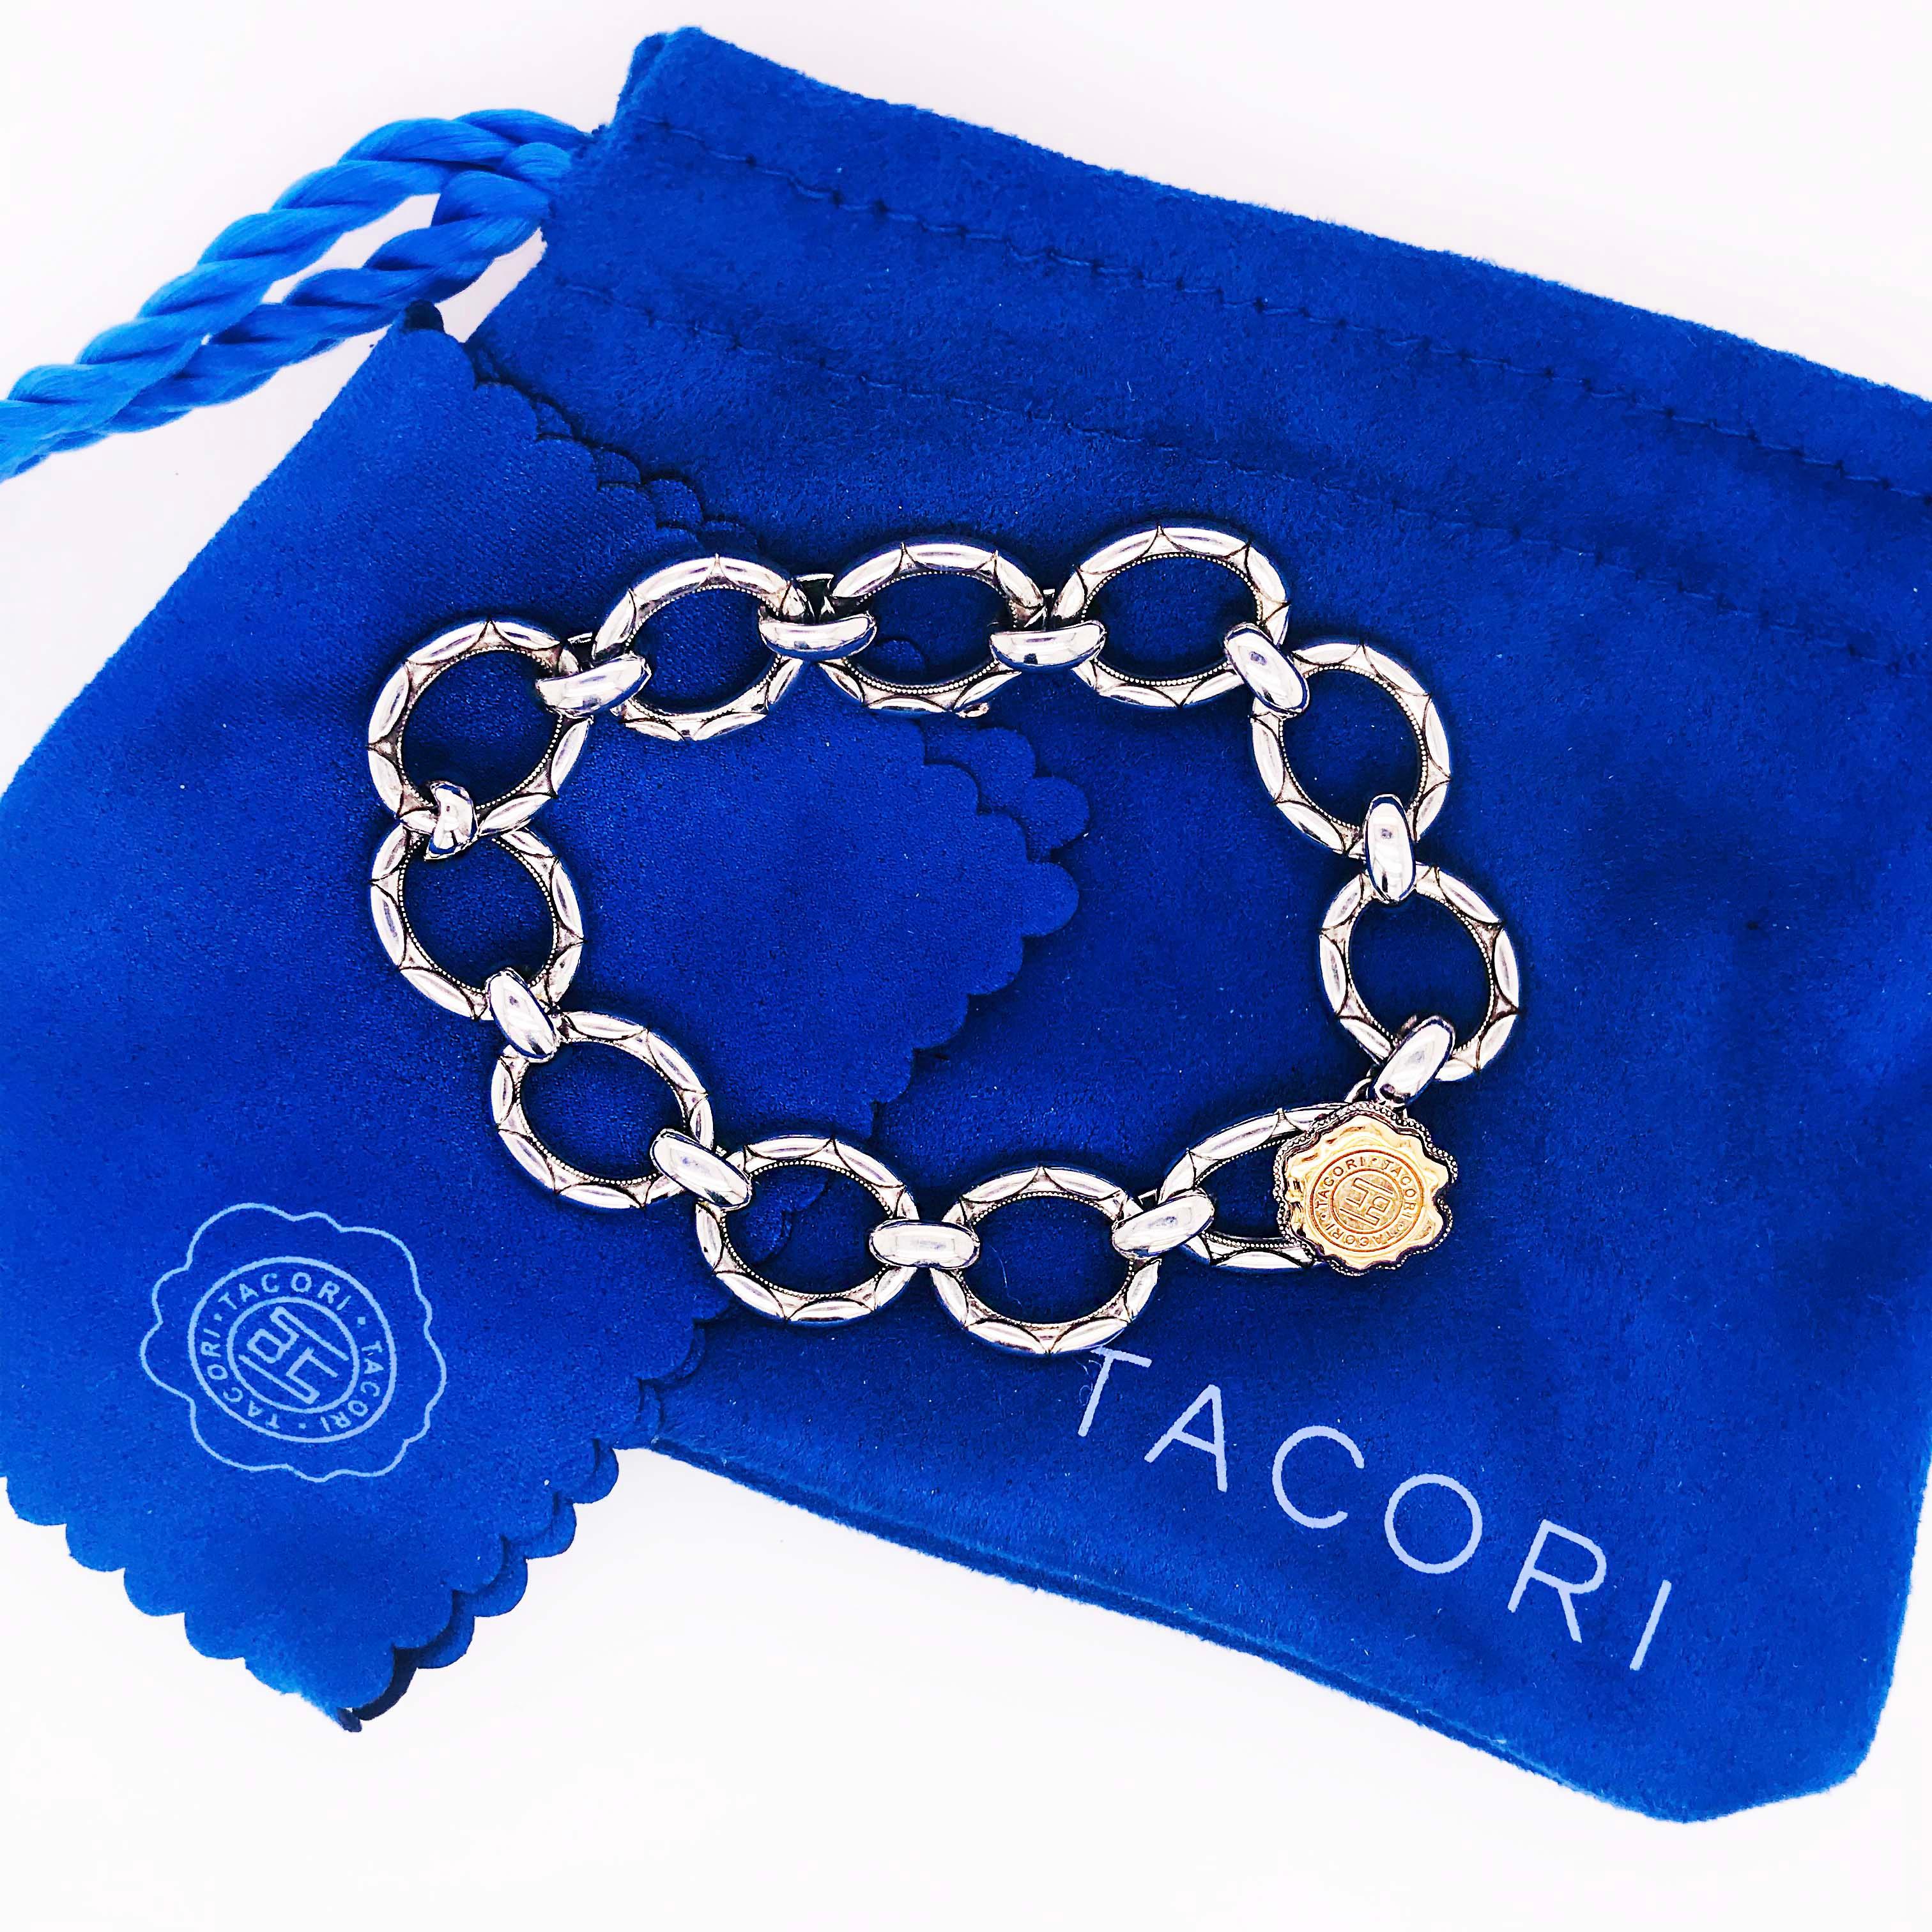 This is an original Tacori 18k925 link bracelet in sterling silver and 18 karat yellow gold. Each link has been hand made with the signature Tacori crescent design. The clasp is an 18 karat yellow gold Tacori seal. The 18 karat yellow gold seal